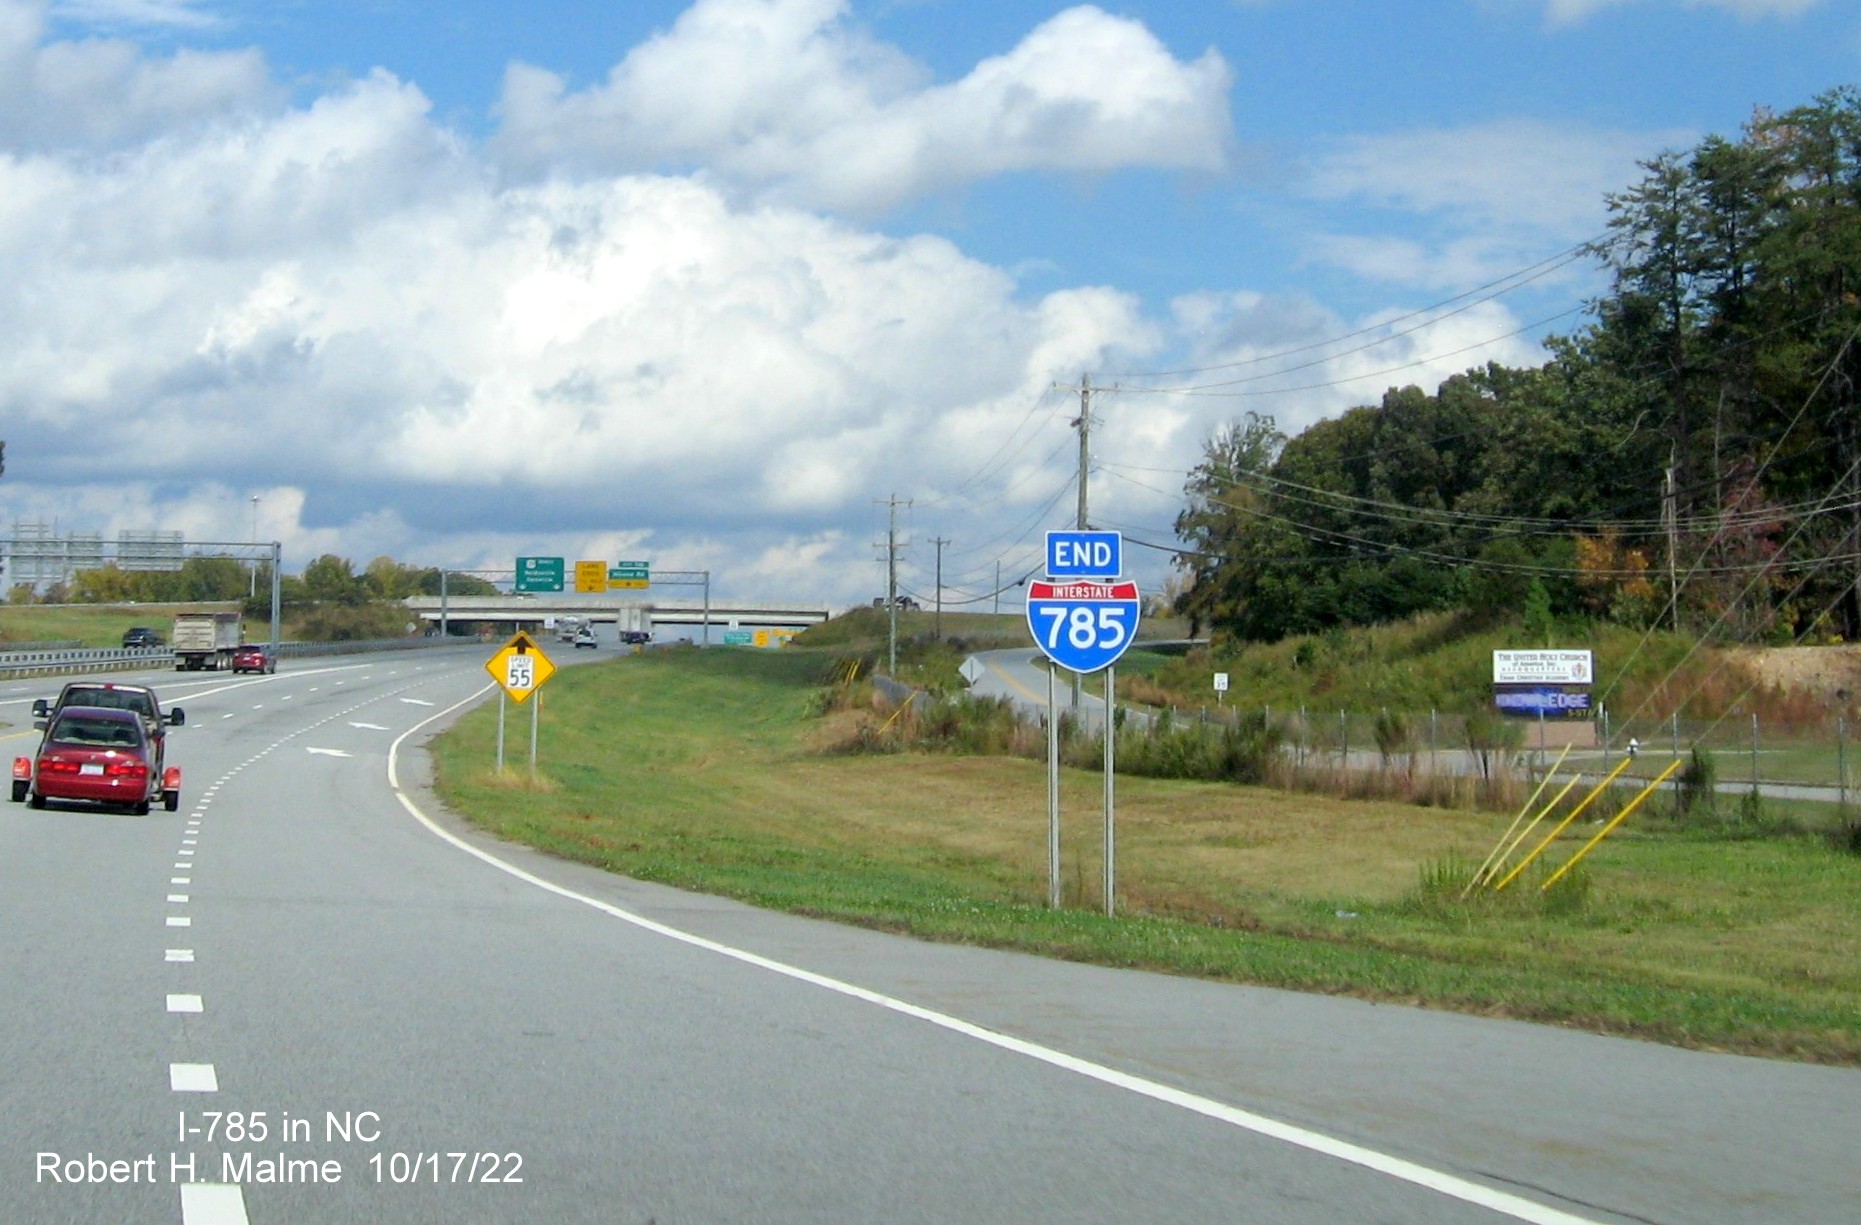 Image of End I-785 sign on ramp to US 29 North from Greensboro Urban Loop, October 2022